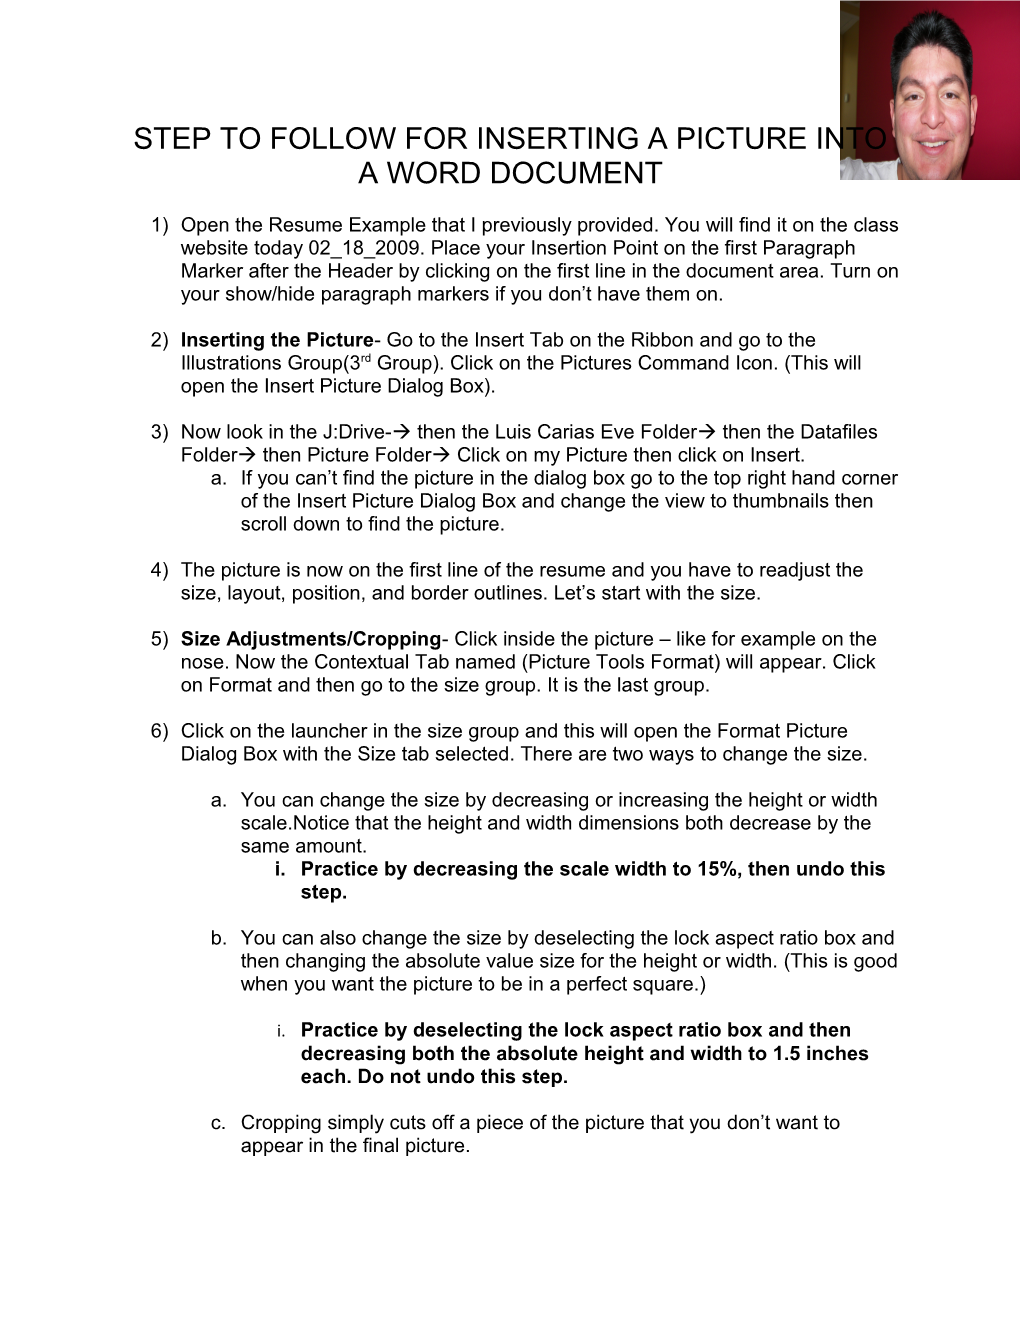 Step to Follow for Inserting a Picture Into a Word Document